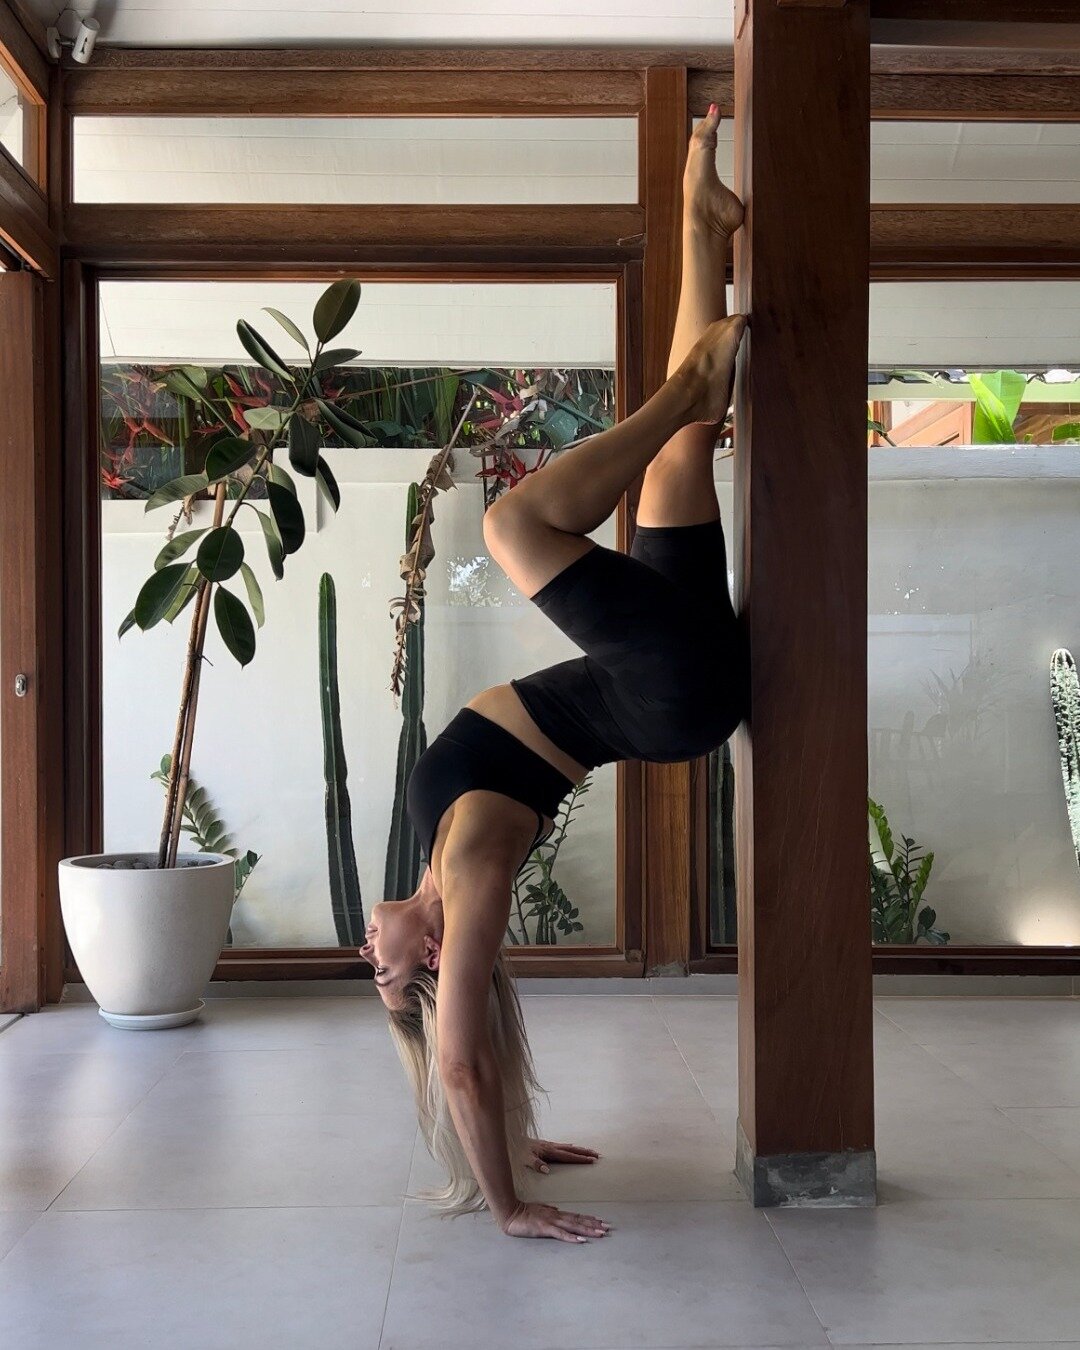 Move your body 💃 Here's how movement has reduced my anxiety

Engaging in regular movement has been instrumental in helping to reduce my anxiety levels! Whether it's going to the gym or practising yoga, movement has helped me release pent-up energy a